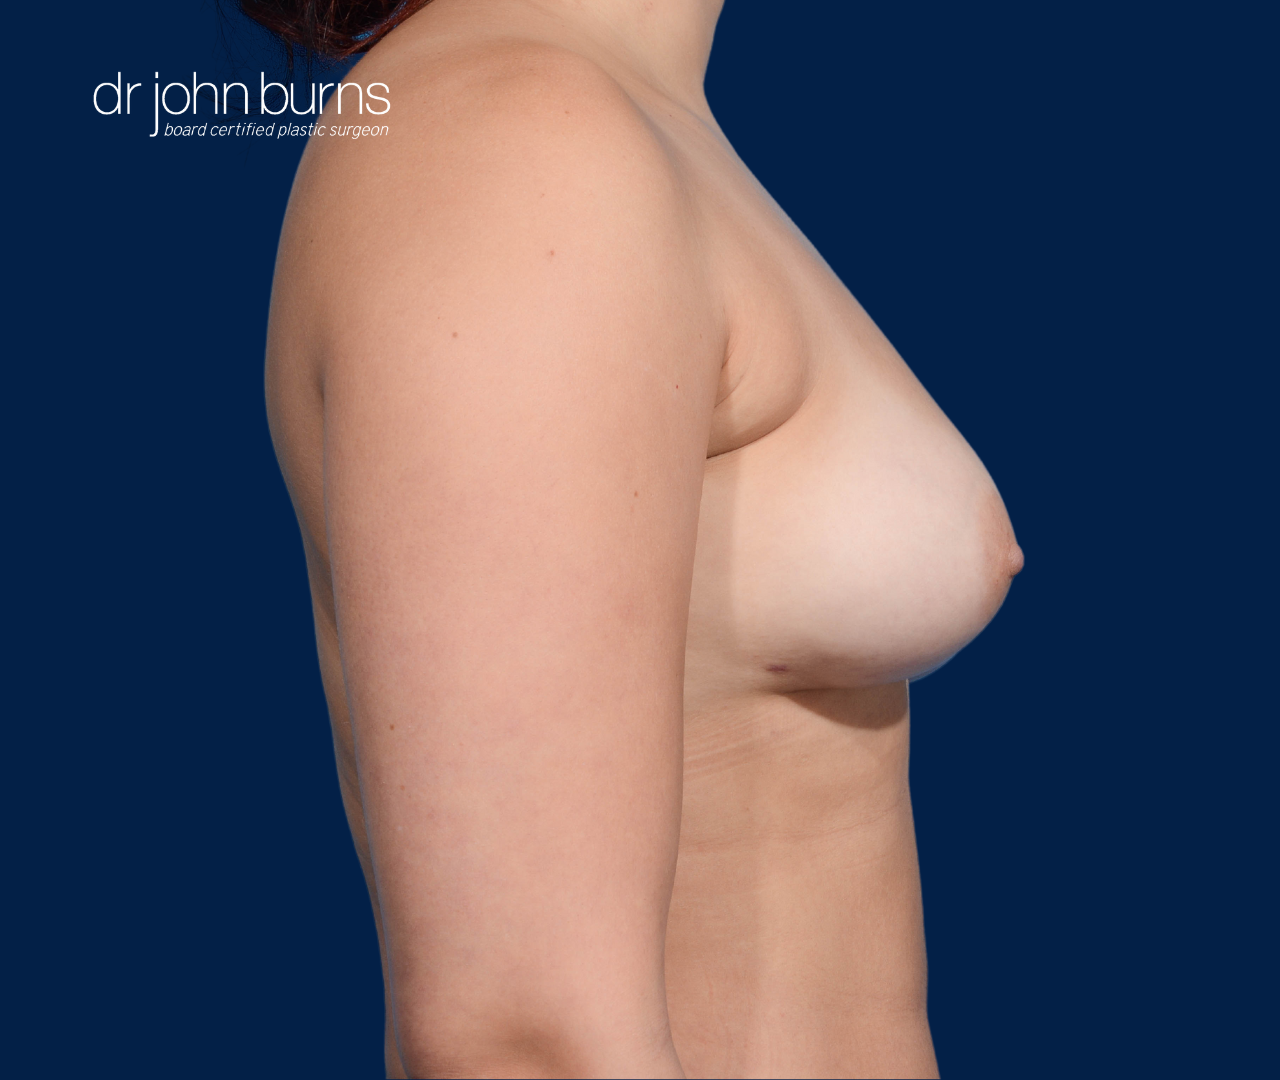 case 7- profile view | after fat transfer to breast by top plastic surgeon, Dr. John Burns